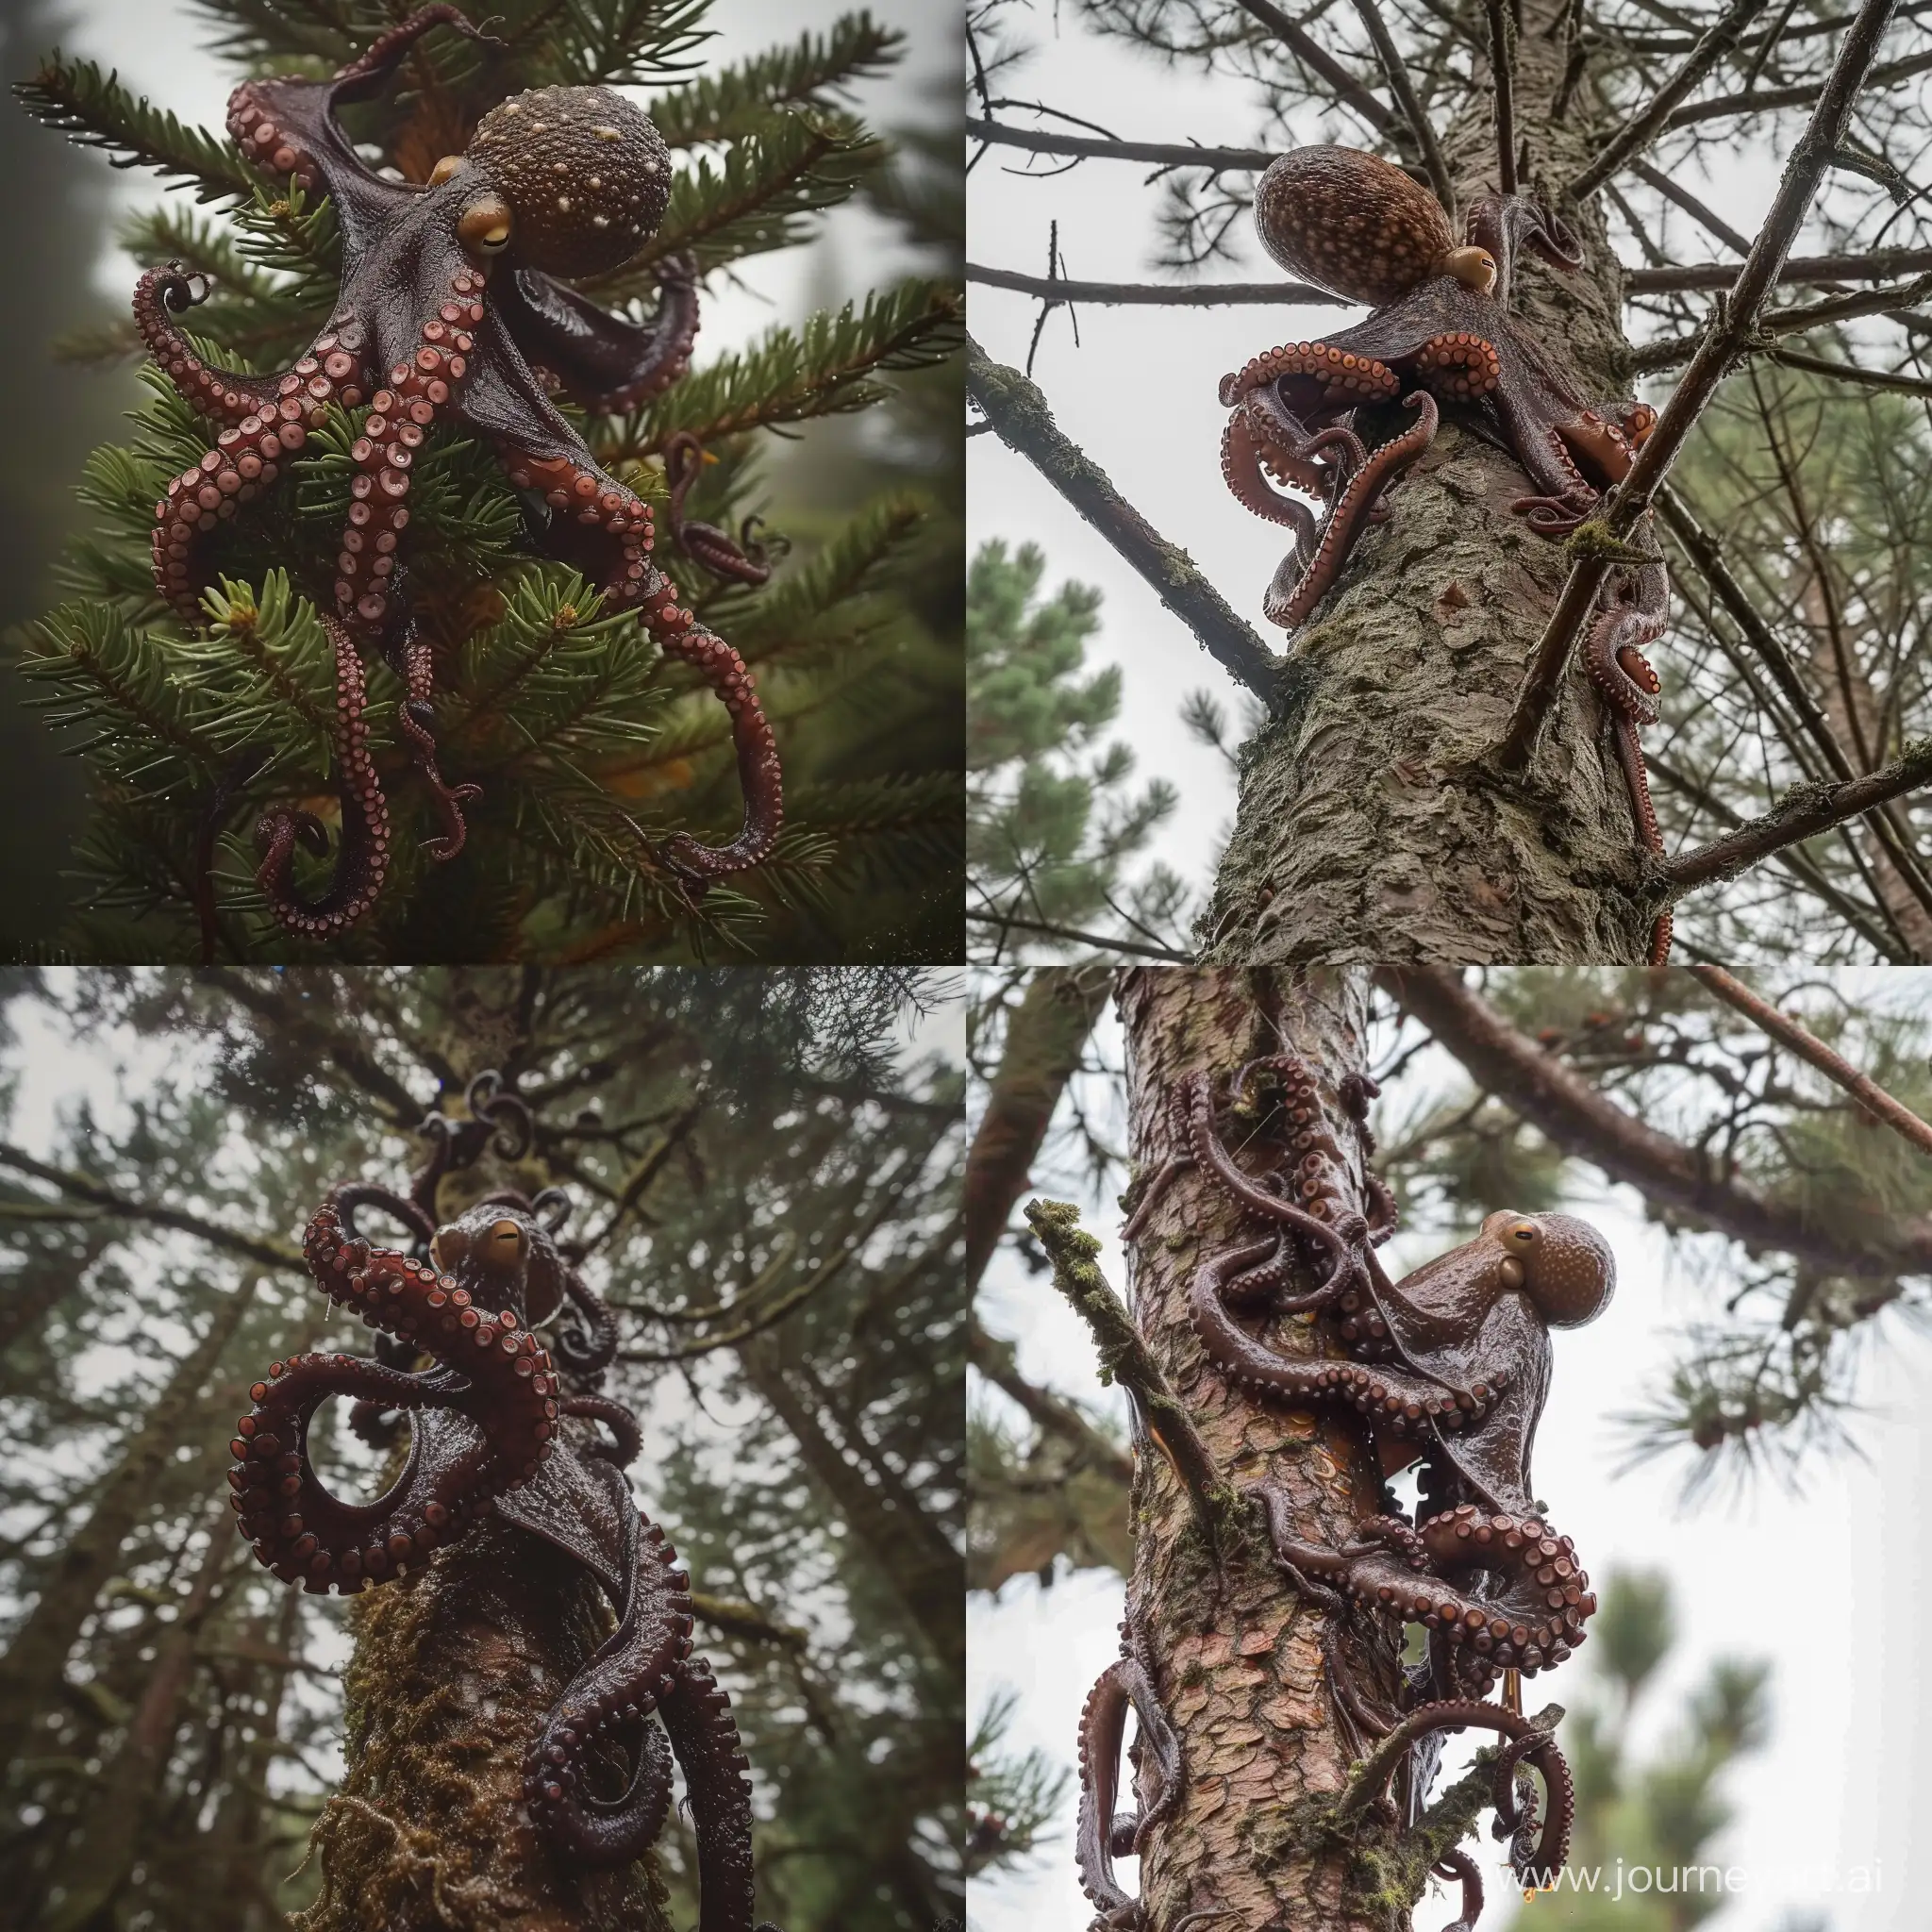 award winning wildlife photo of an incredibly slimy and wet medium sized mottled dark brown octopus scaling a tall pine tree, grabbing branches with its tentacles, slime trail, temperate pine rainforest, daylight, telephoto lens, canon camera, wide shot, shot from below